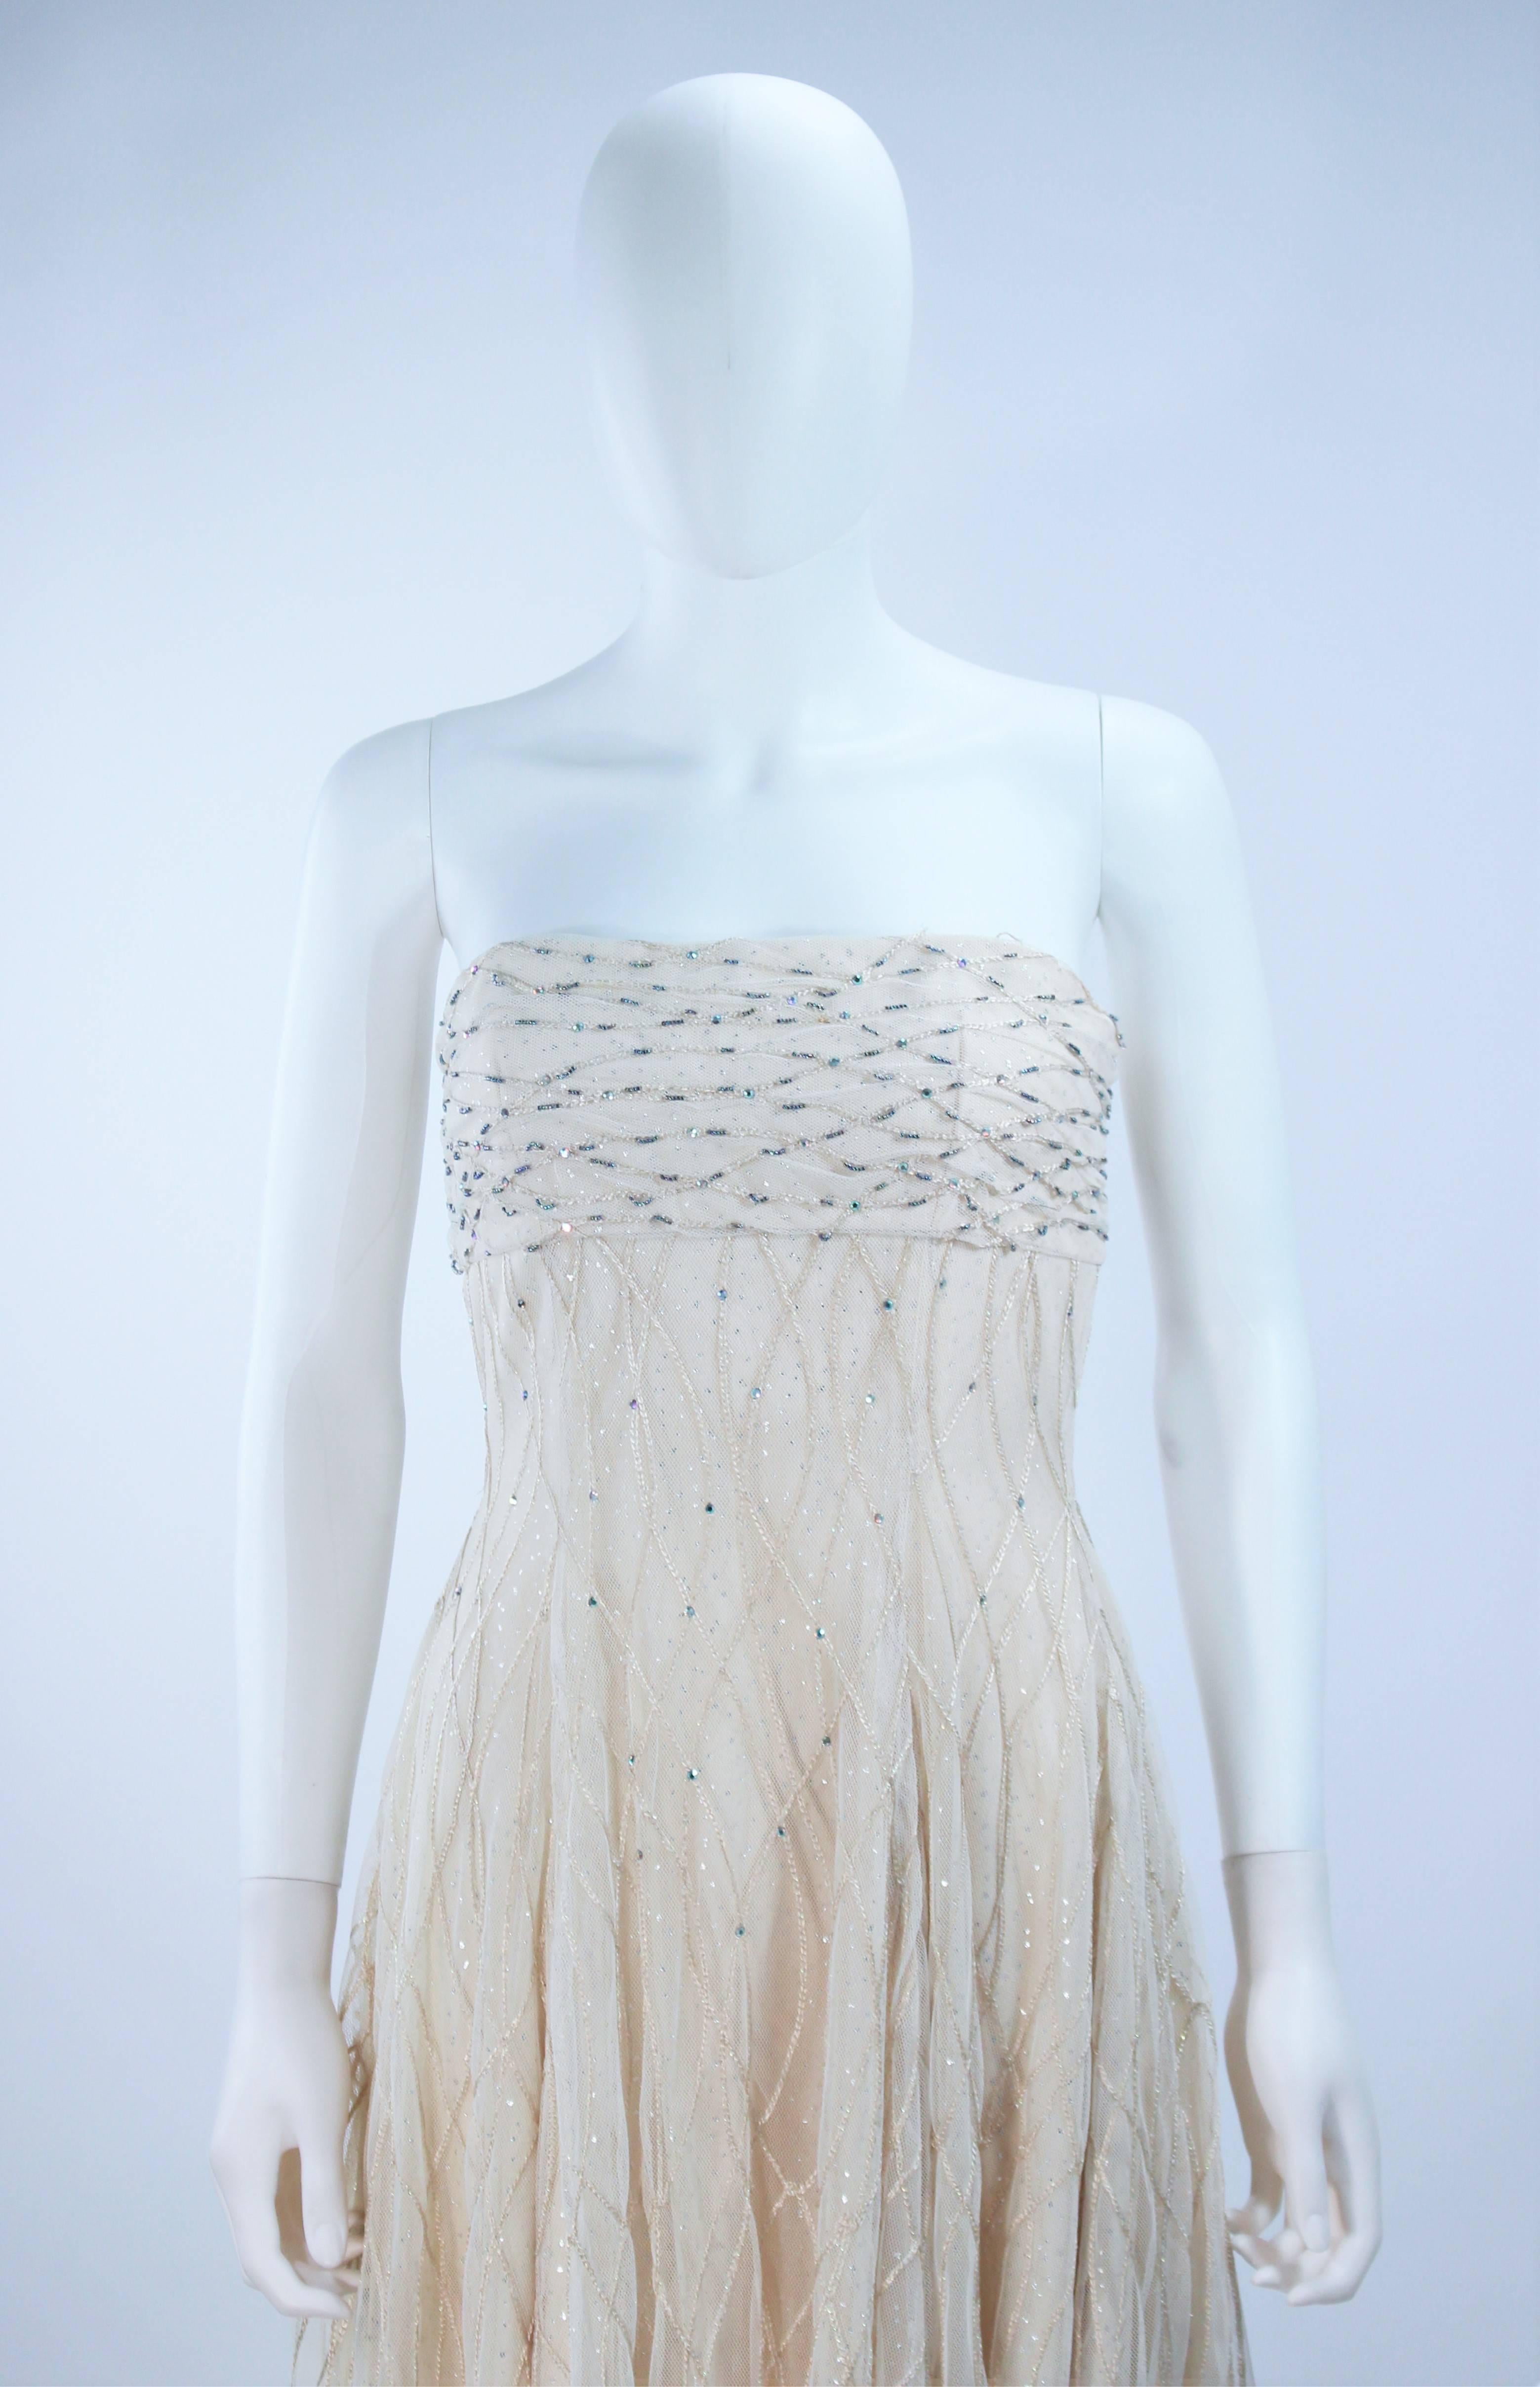 Gray VICTOR COSTA Off White Iridescent Strapless Beaded Gown Size 2 4 For Sale